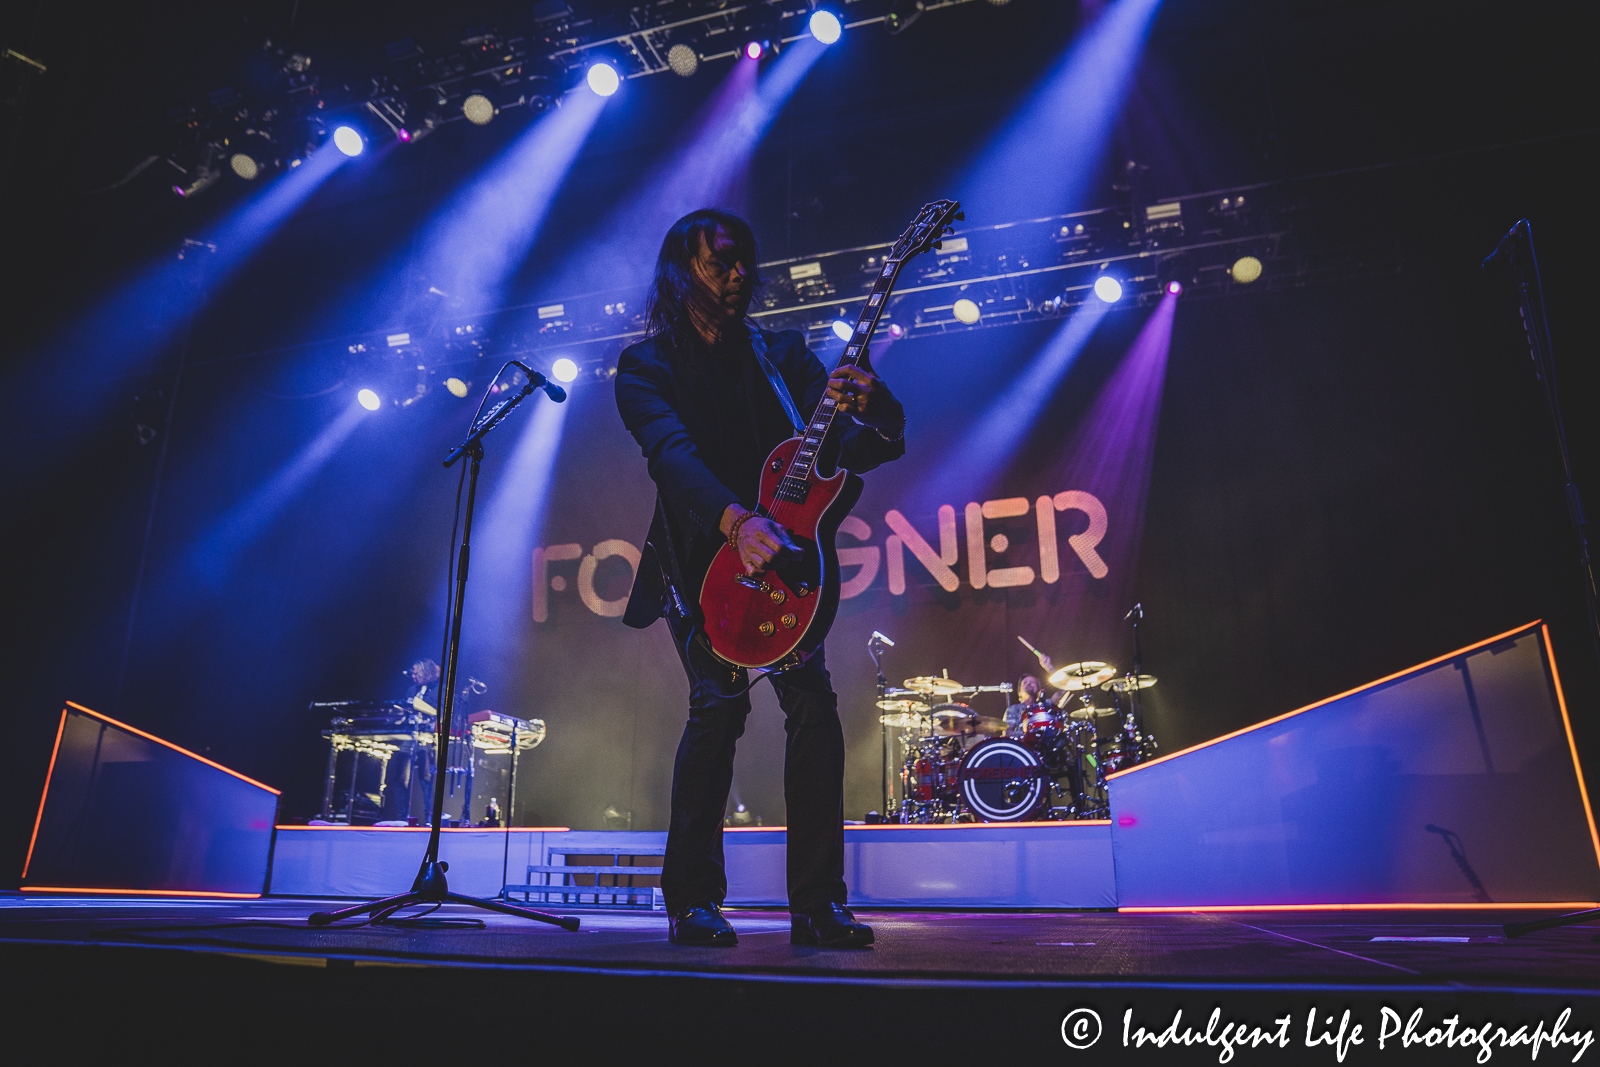 Foreigner guitarist Luis Maldonado performing live in concert with keyboard player Michael Bluestein and drummer Chris Frazier at Stormont Vail Events Center in Topeka, KS on May 2, 2023.